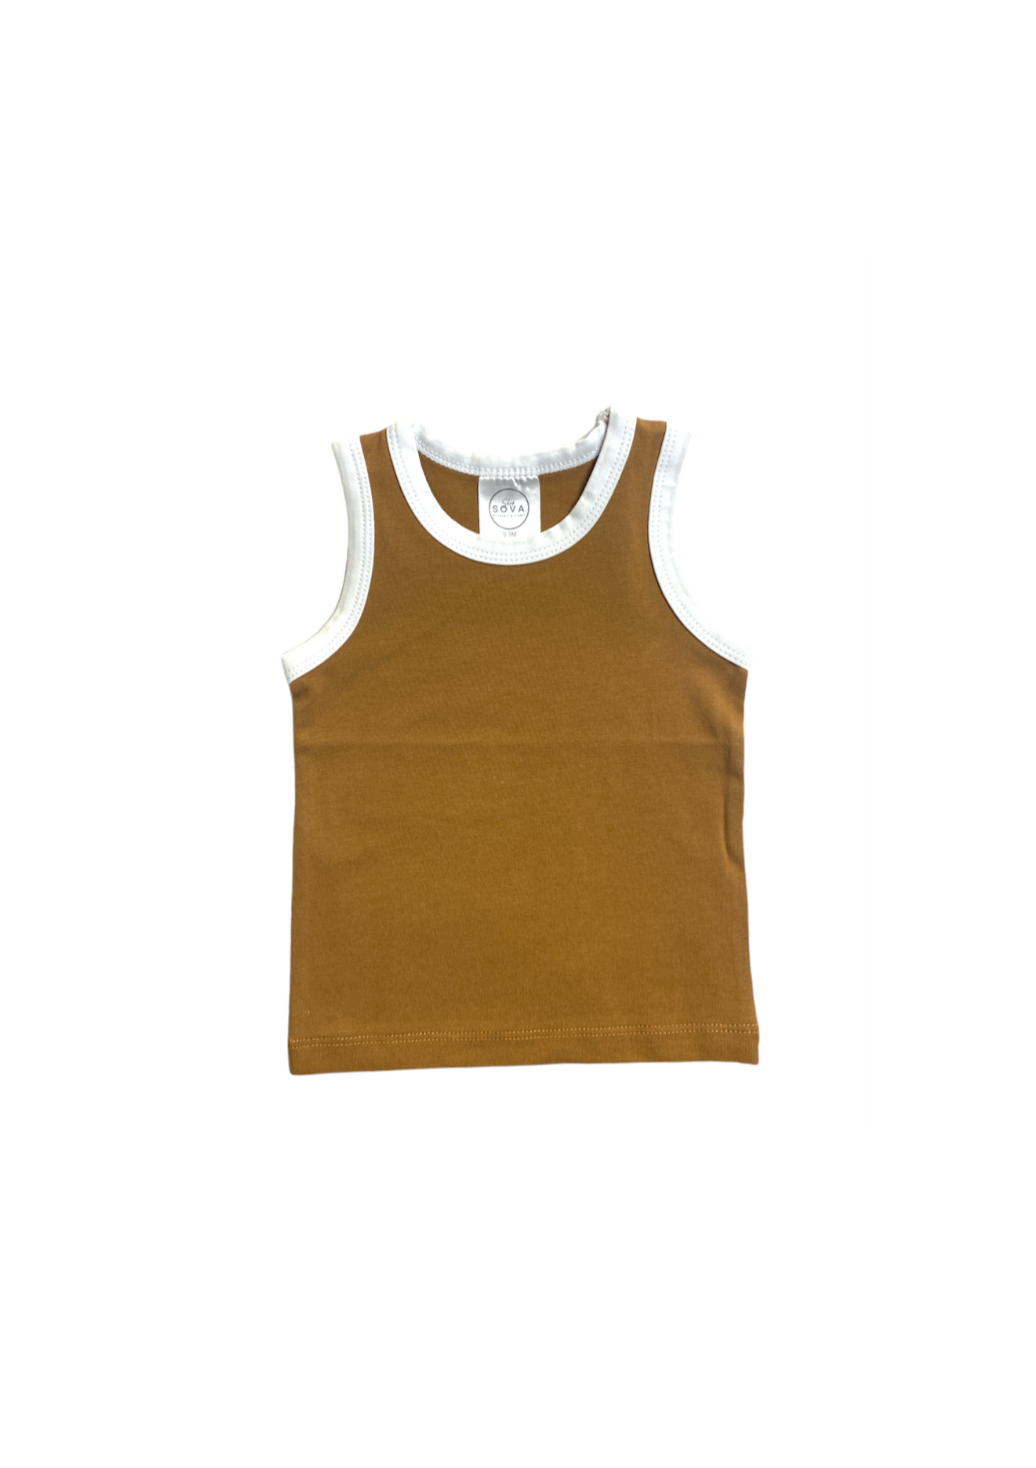 RAD TANK IN TOFFEE